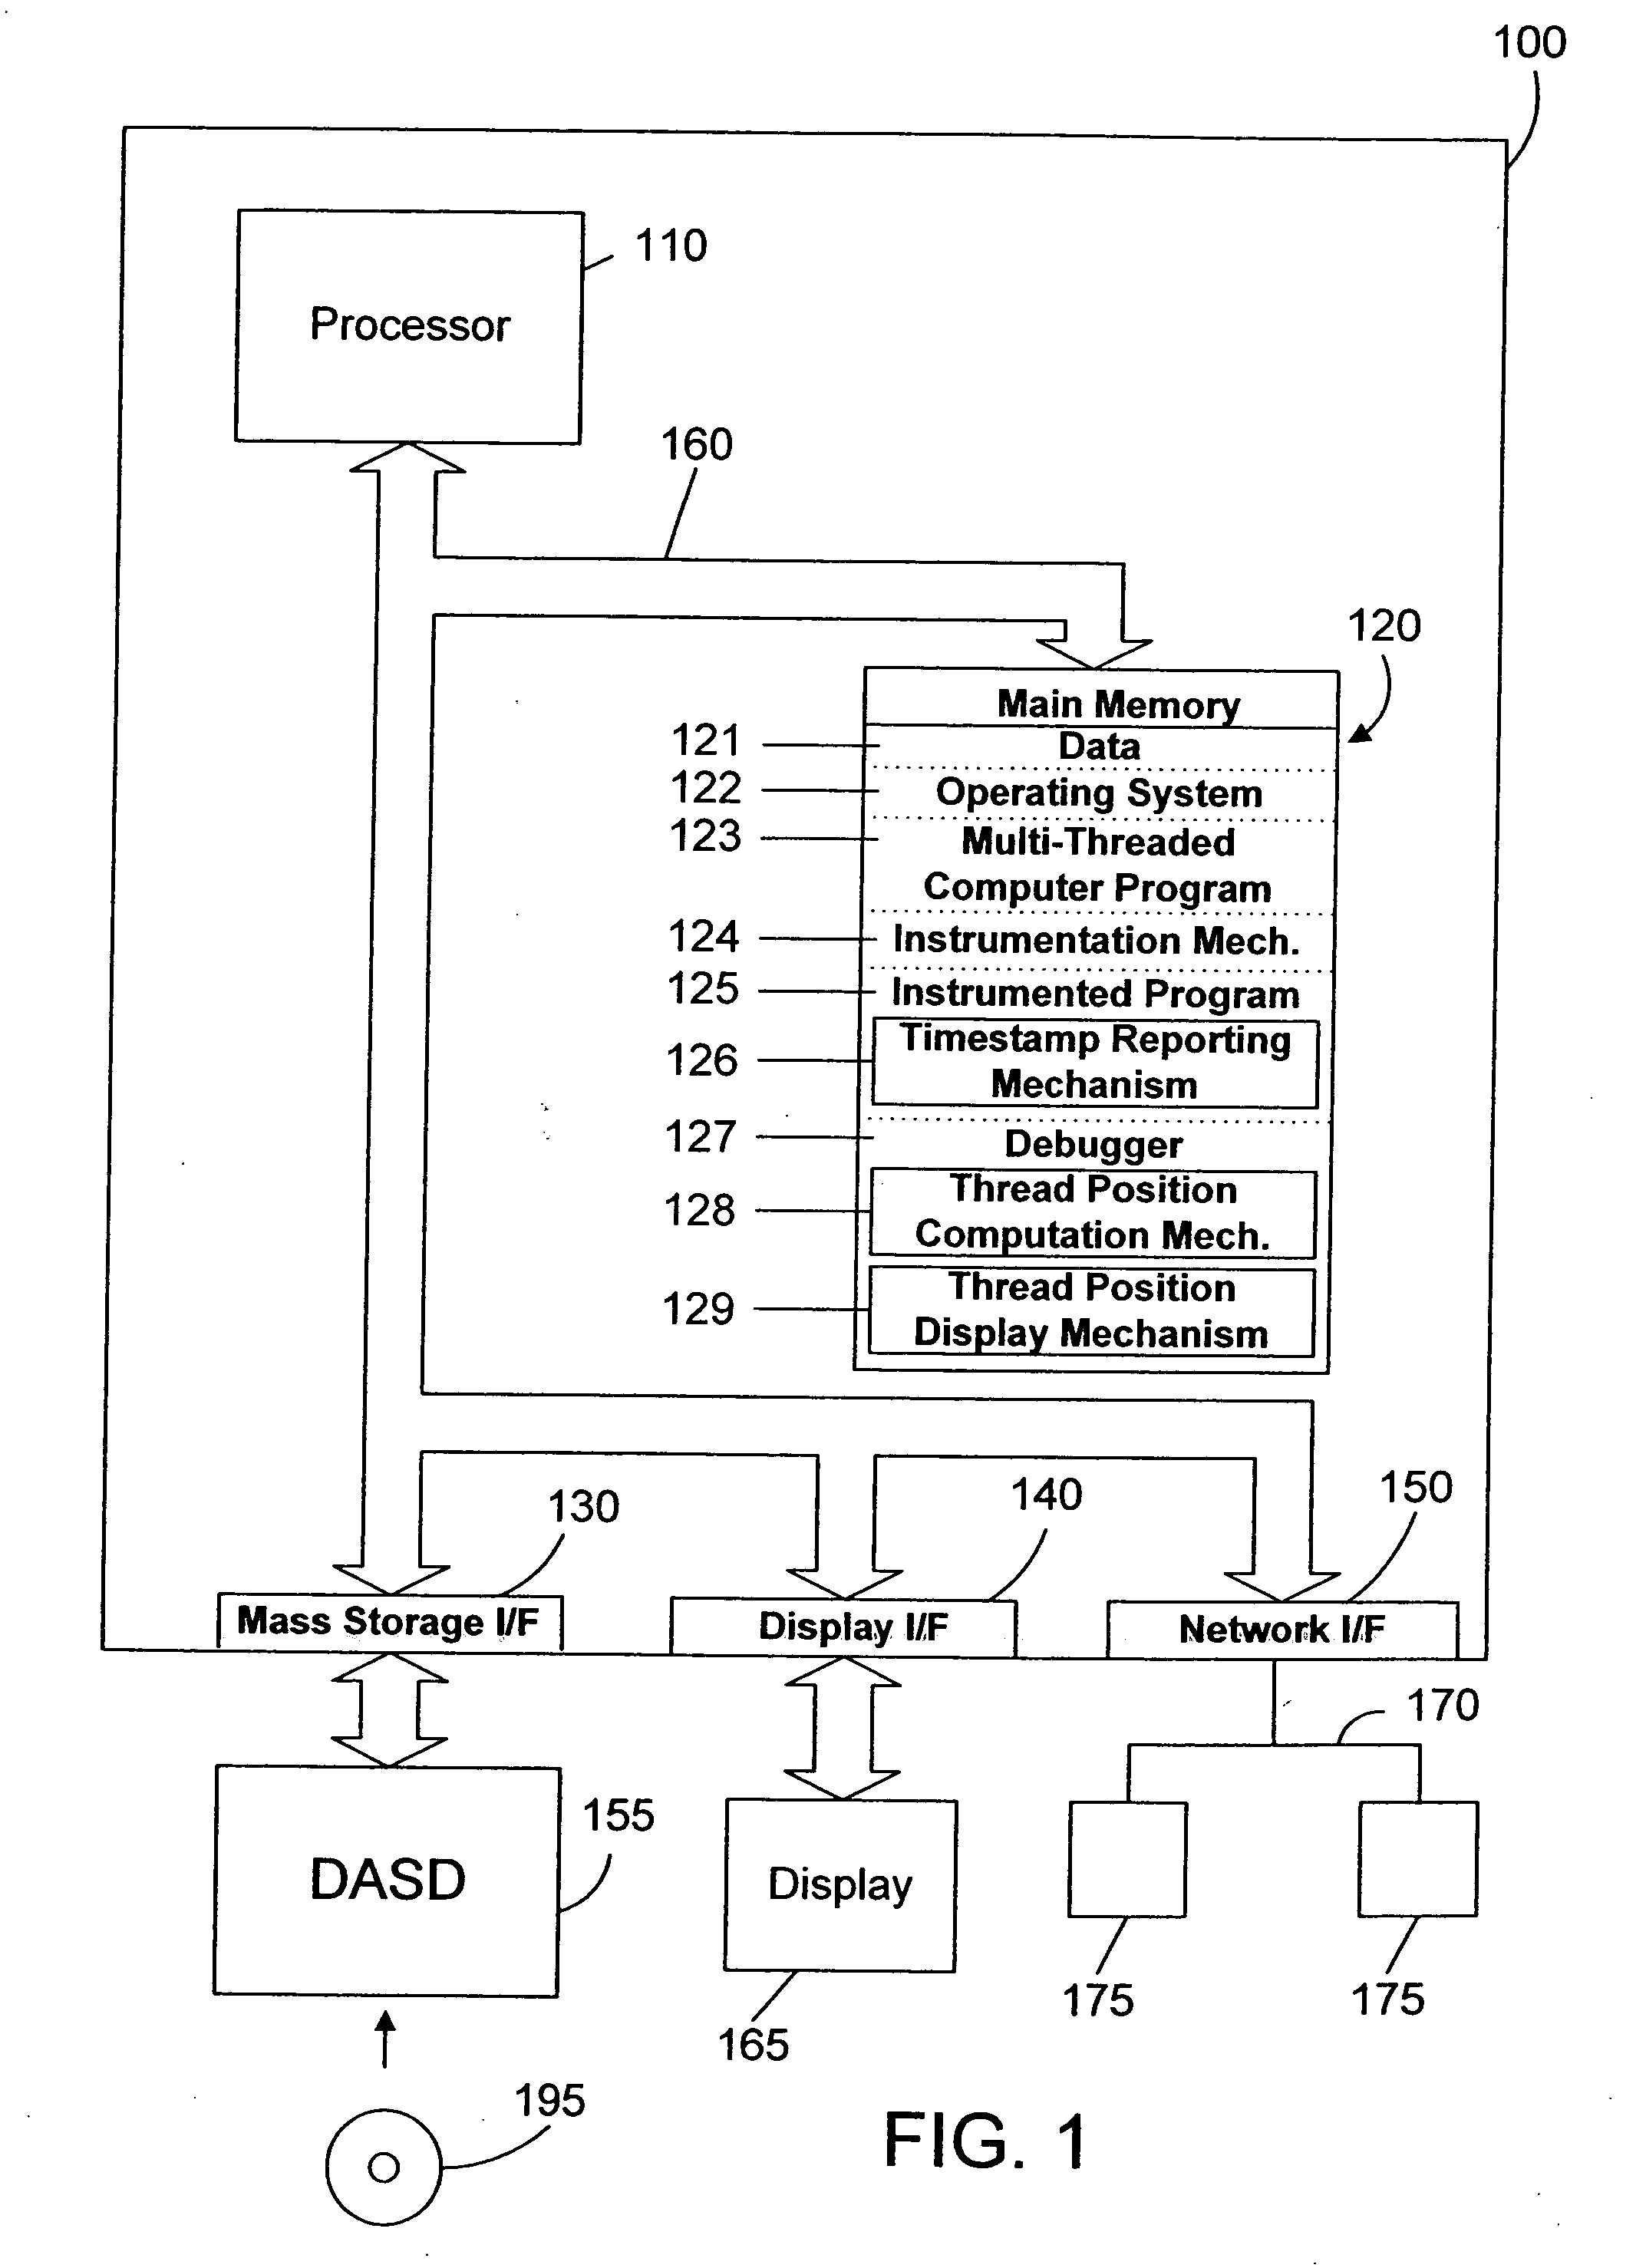 Debugger apparatus and method for indicating time-correlated position of threads in a multi-threaded computer program